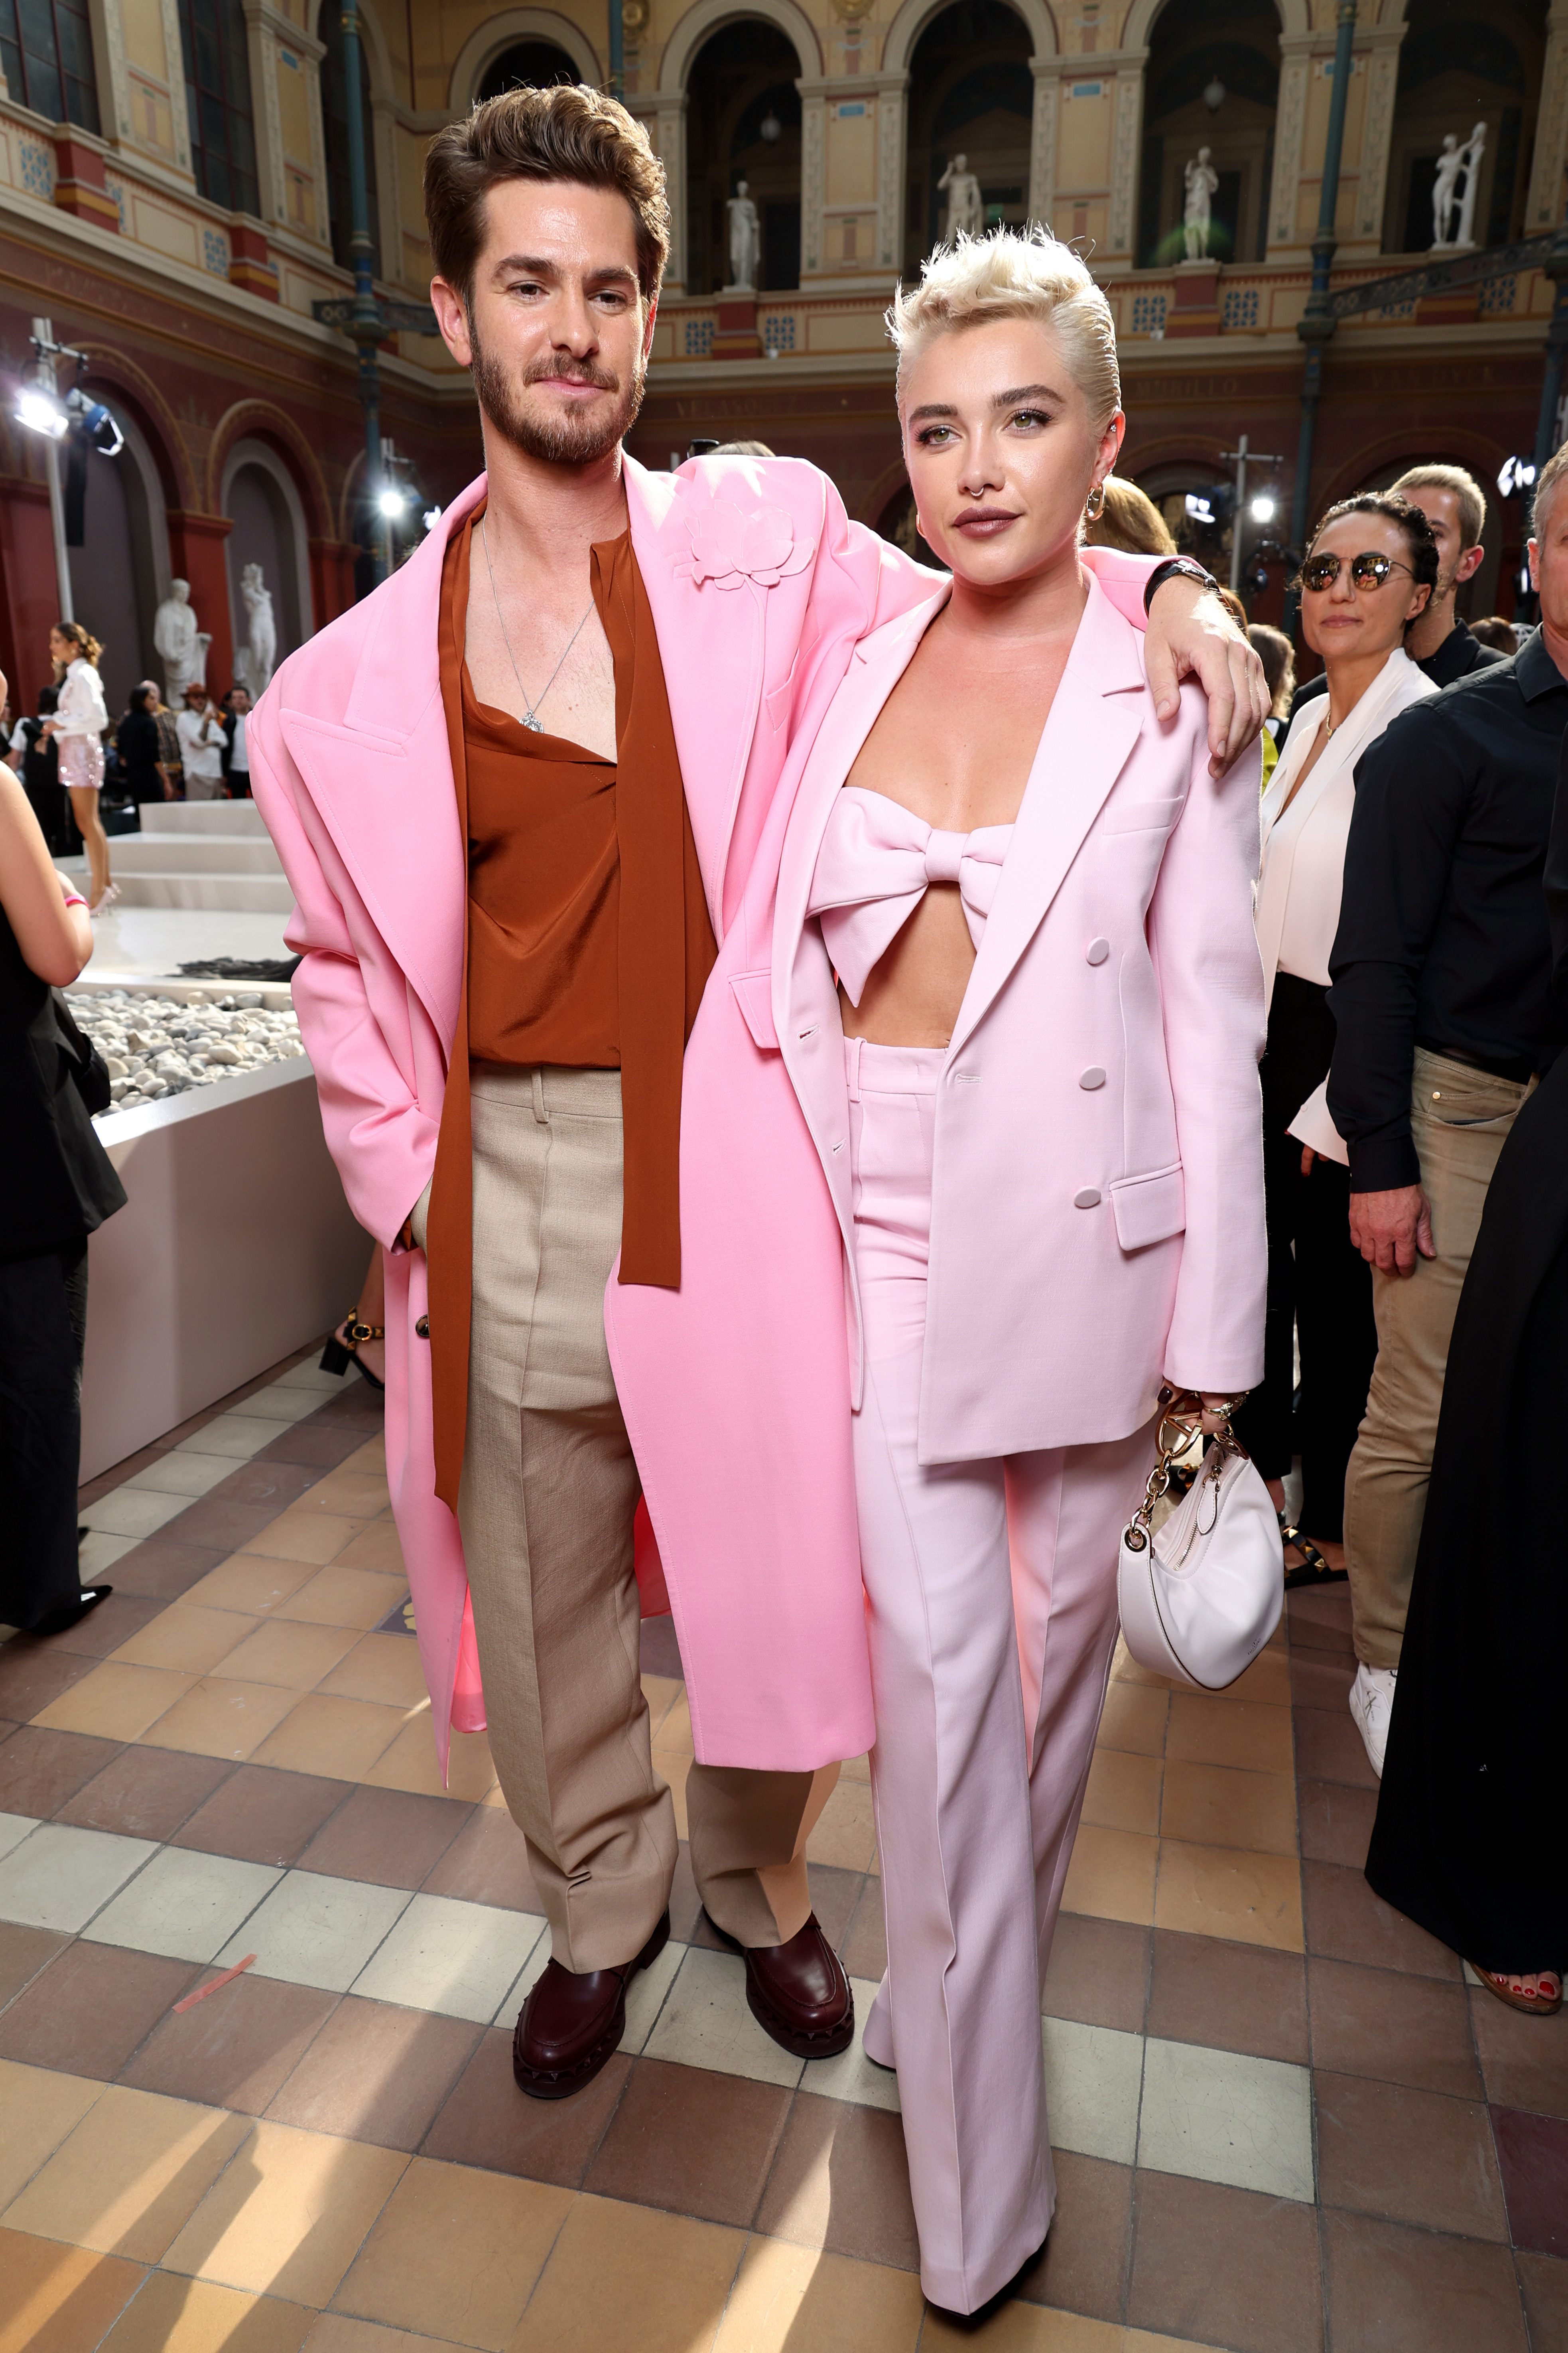 Closeup of Andrew Garfield and Florence Pugh